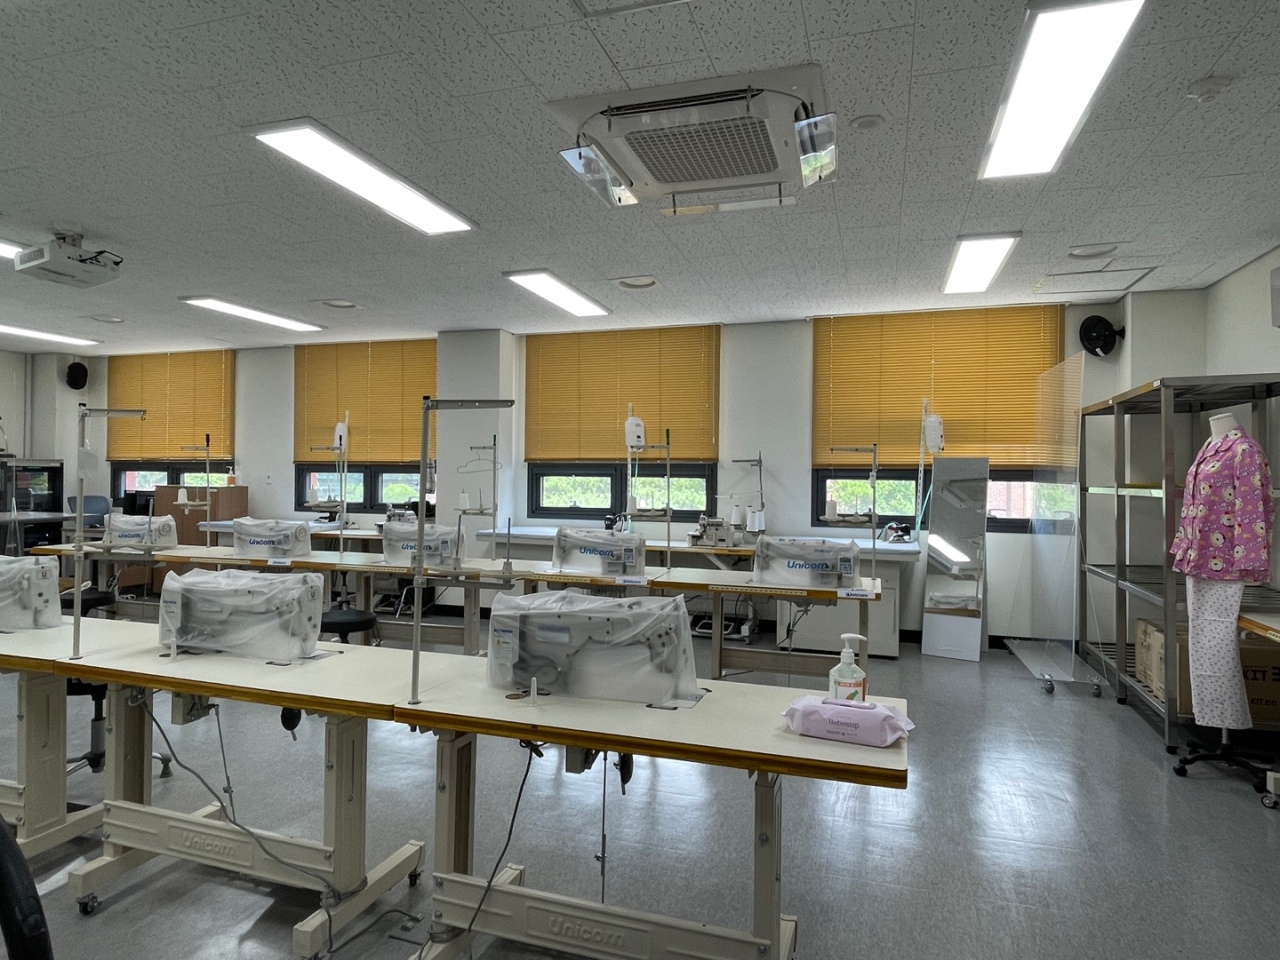 North Korean defectors can take professional courses in sewing and clothing alteration at the Hanawon vocational training center. (Ji Da-gyum/The Korea Herald)